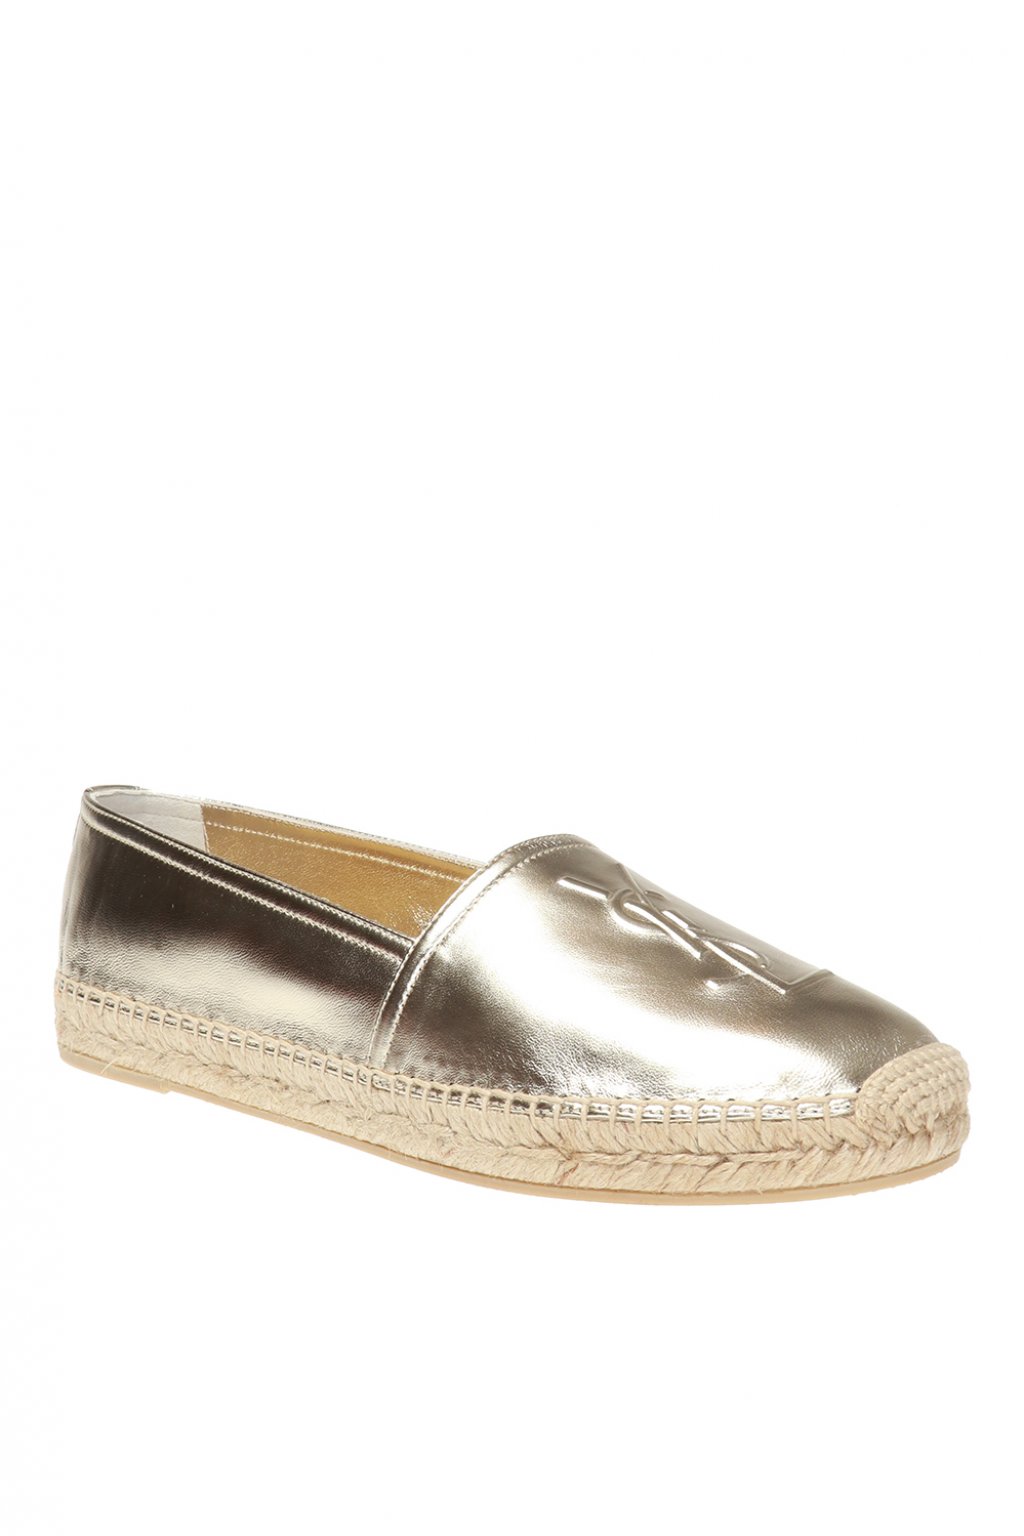 Saint Laurent YSL logo espadrille Silver Leather NEW IN BOX Size 36+  AUTHENTIC